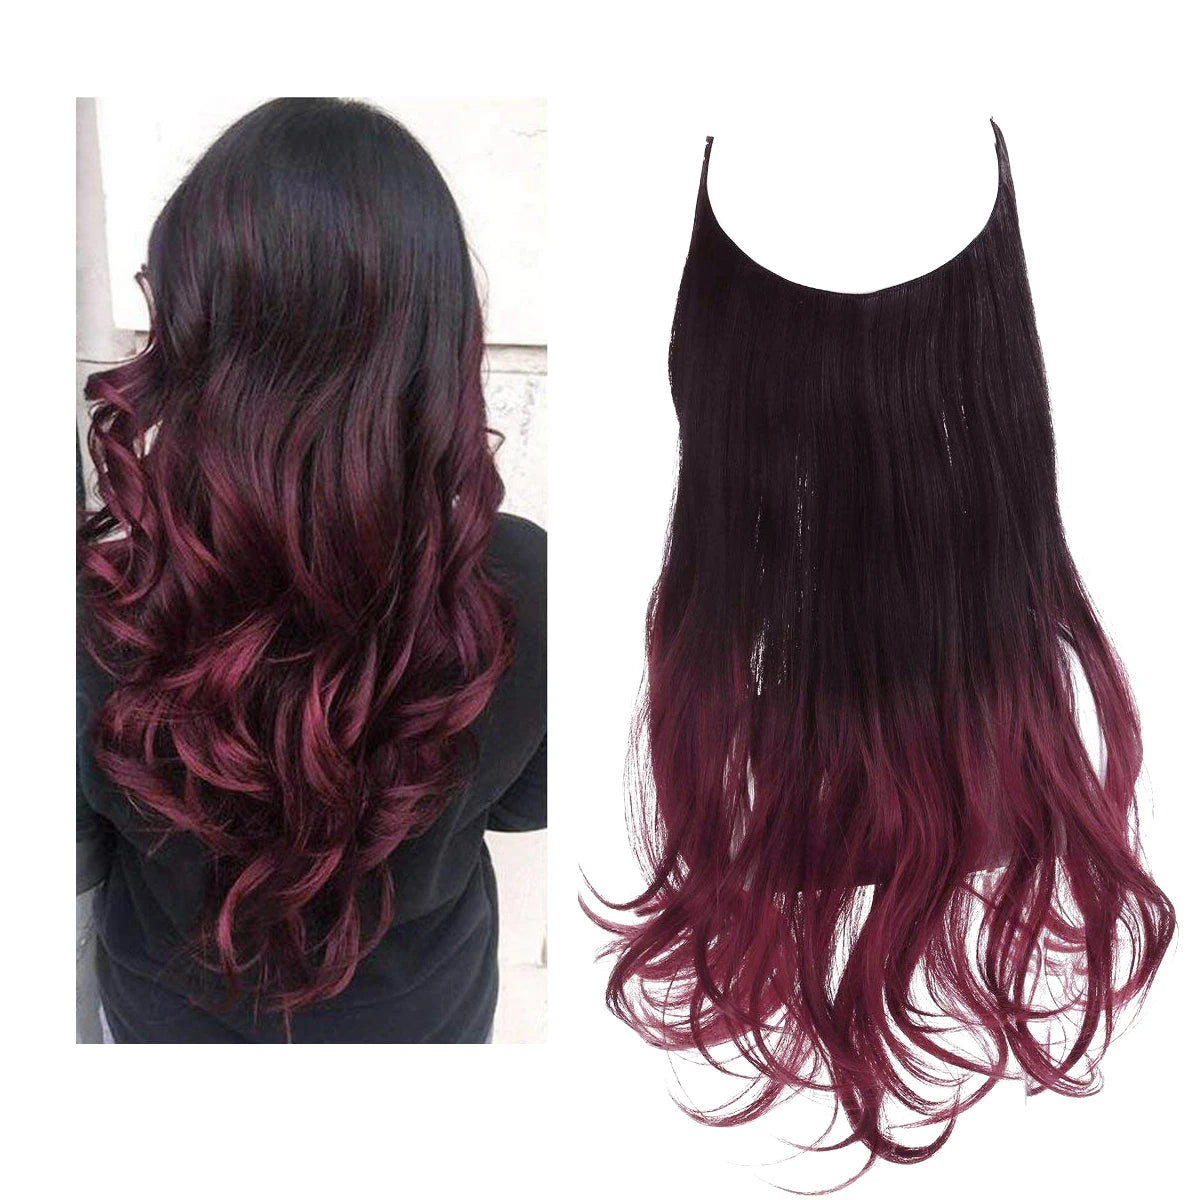 Artificial Hair Extensions with Natural Color Gradients and Waves